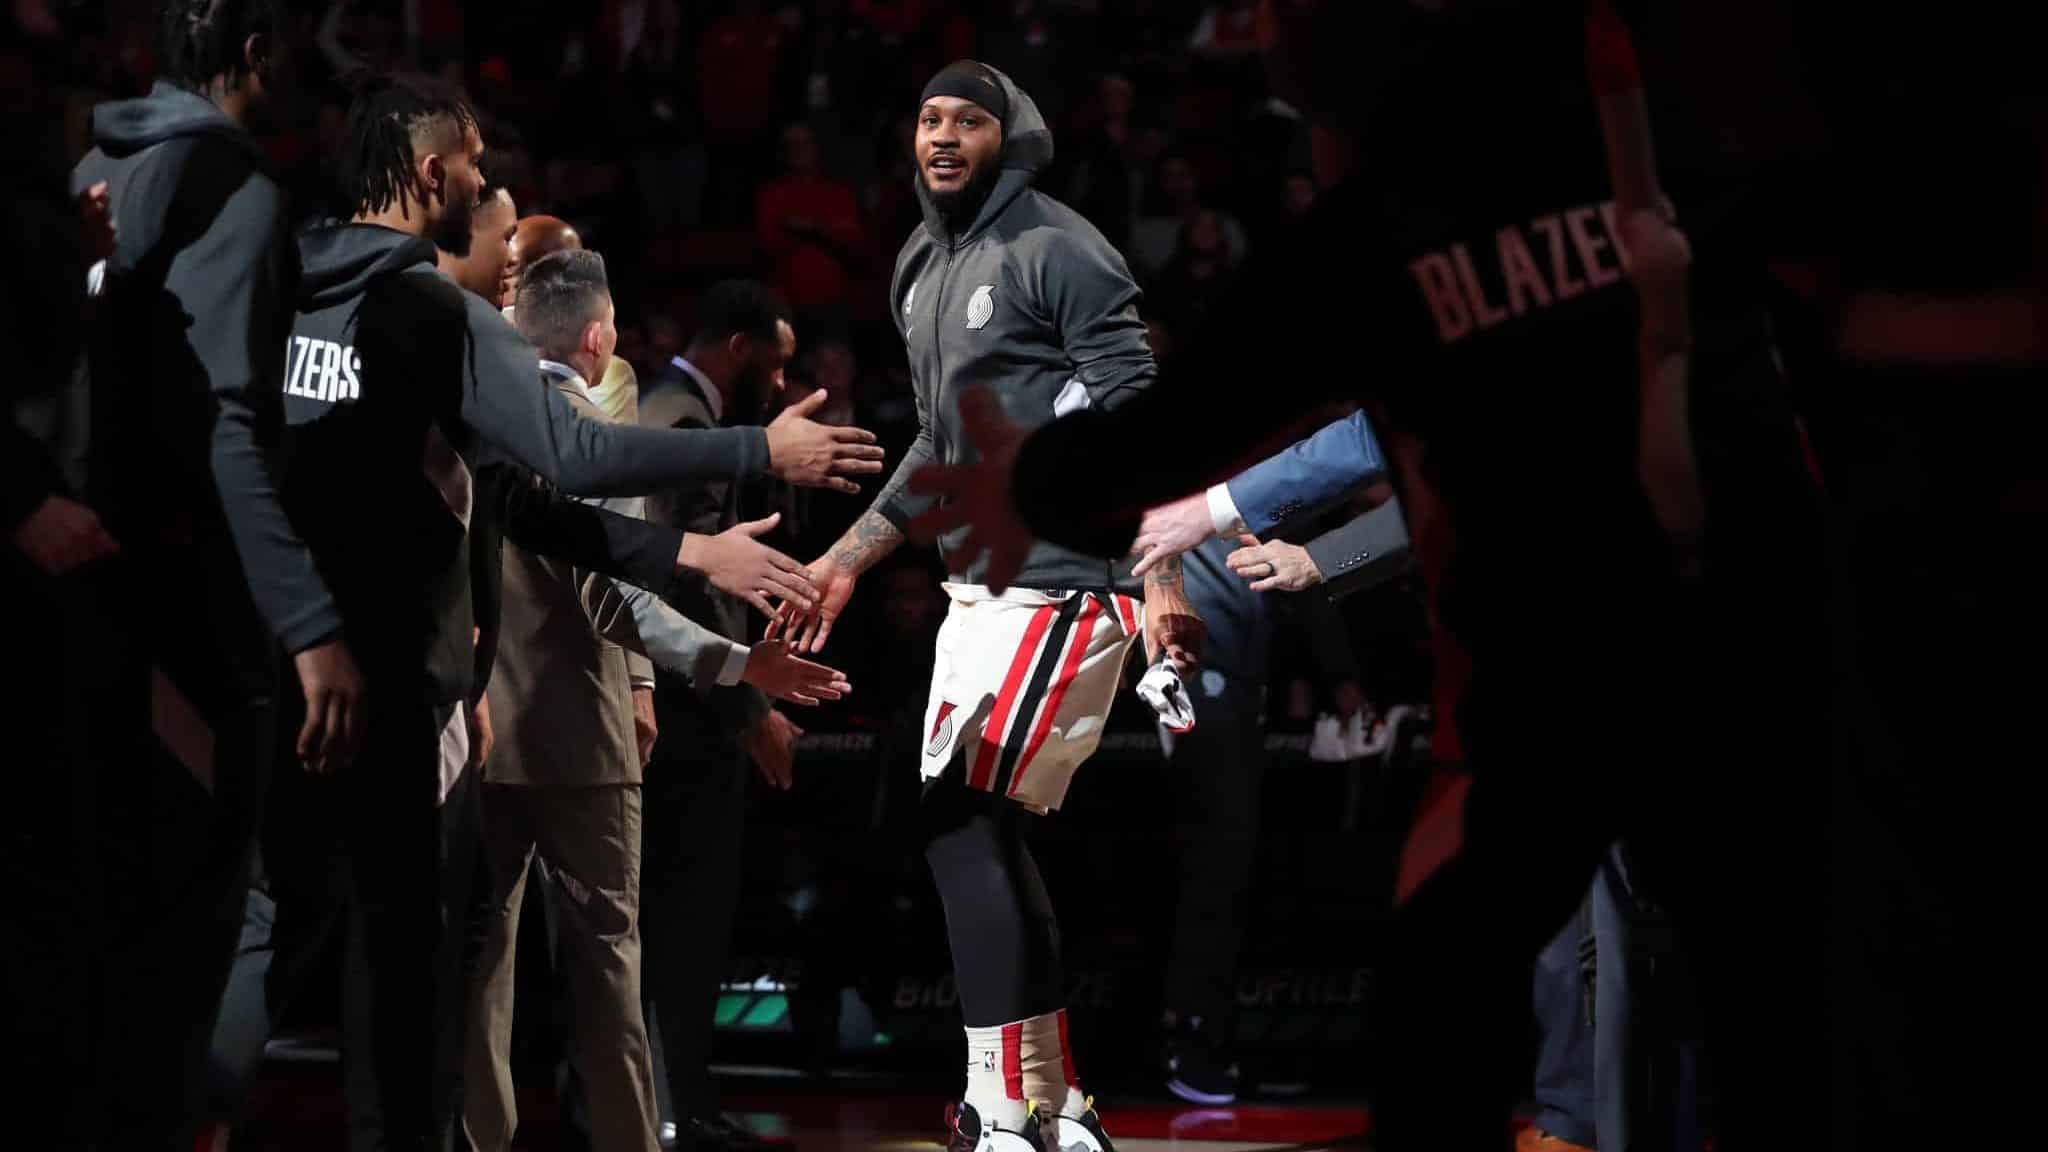 PORTLAND, OREGON - FEBRUARY 09: Carmelo Anthony #00 of the Portland Trail Blazers is introduced to the starting lineup prior to taking on the Miami Heat during their game at Moda Center on February 09, 2020 in Portland, Oregon. NOTE TO USER: User expressly acknowledges and agrees that, by downloading and or using this photograph, User is consenting to the terms and conditions of the Getty Images License Agreement.